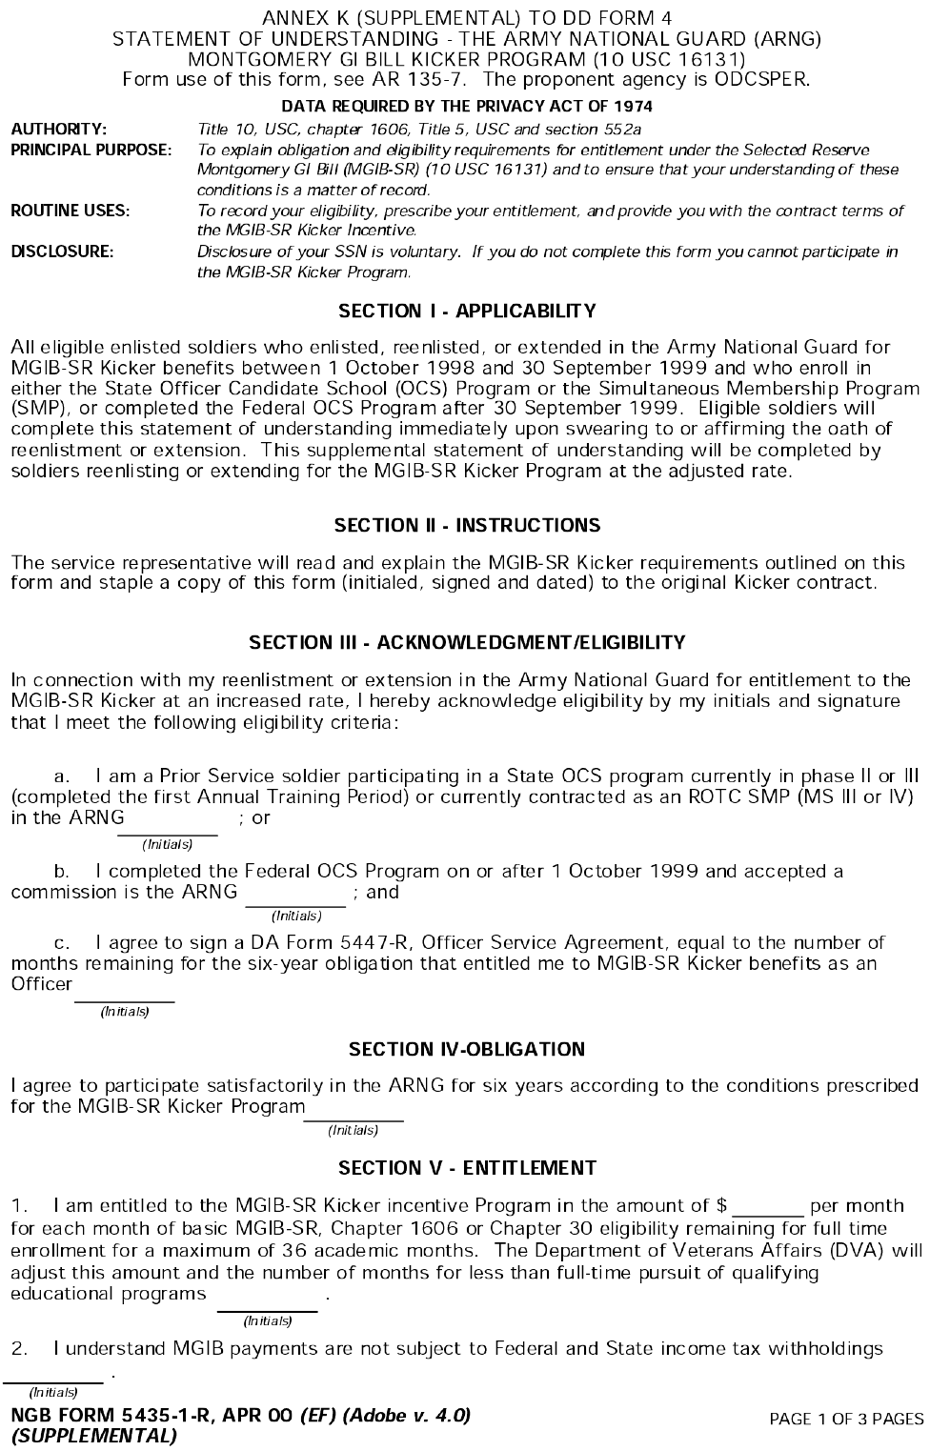 NGB Form 5435-1-R (DD Form 4) Annex K (SUPPLEMENTAL) Statement of Understanding - the Army National Guard (Arng), Page 1